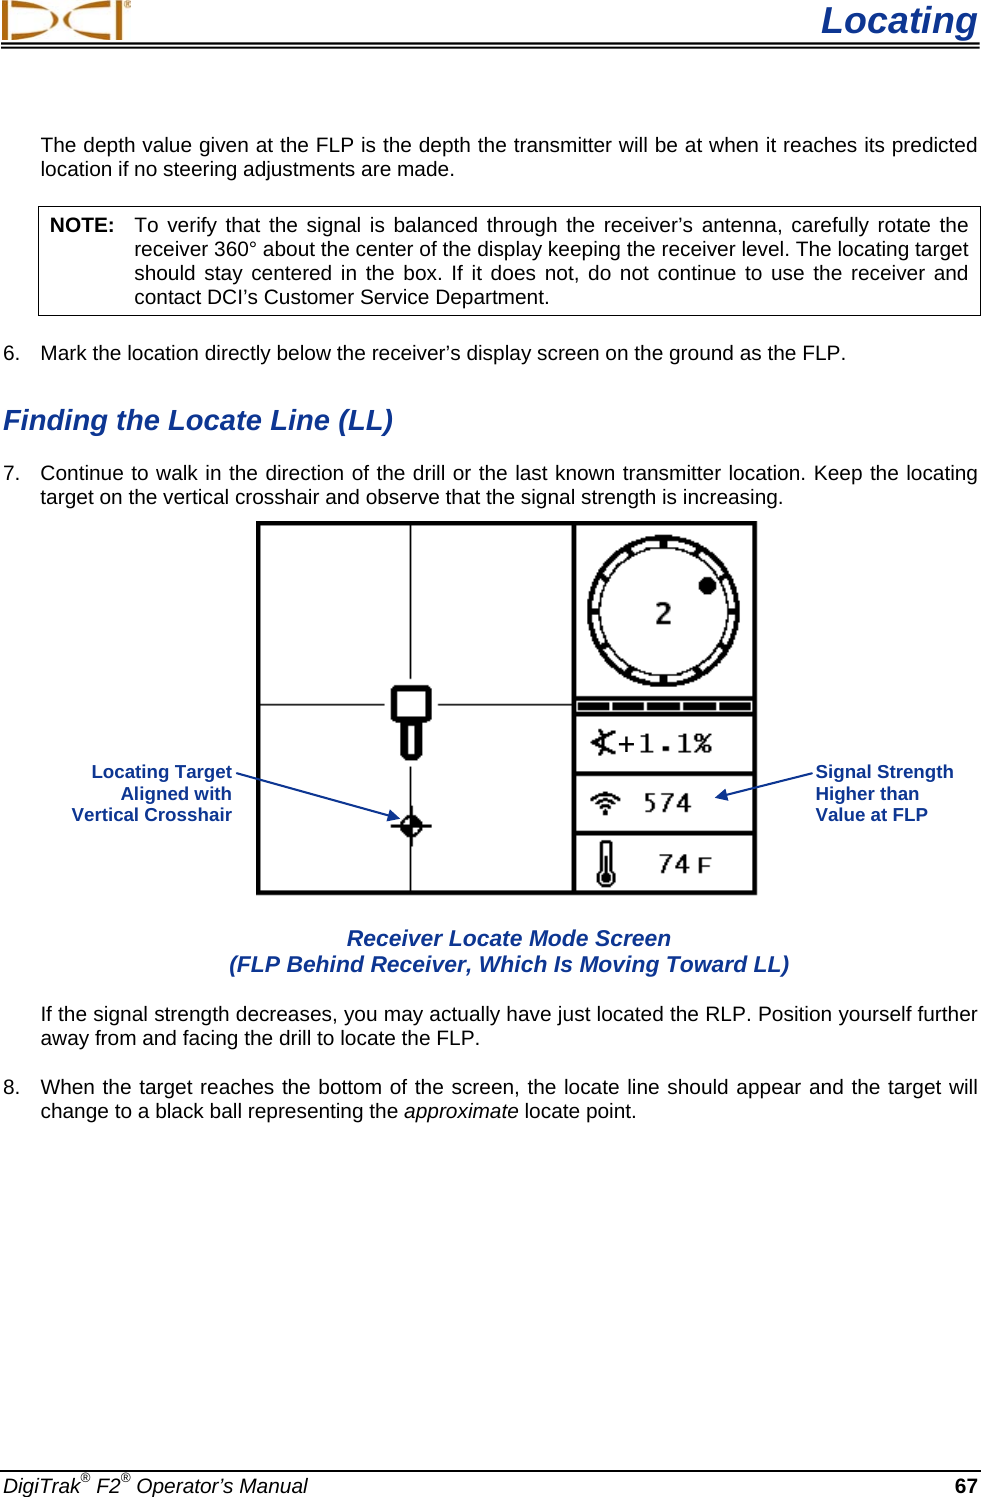  Locating DigiTrak® F2® Operator’s Manual 67 The depth value given at the FLP is the depth the transmitter will be at when it reaches its predicted location if no steering adjustments are made. NOTE: To verify that the signal is balanced through the receiver’s antenna, carefully rotate the receiver 360° about the center of the display keeping the receiver level. The locating target should stay centered in the box. If it does not, do not continue to use the receiver and contact DCI’s Customer Service Department. 6. Mark the location directly below the receiver’s display screen on the ground as the FLP.  Finding the Locate Line (LL) 7. Continue to walk in the direction of the drill or the last known transmitter location. Keep the locating target on the vertical crosshair and observe that the signal strength is increasing.   Receiver Locate Mode Screen (FLP Behind Receiver, Which Is Moving Toward LL) If the signal strength decreases, you may actually have just located the RLP. Position yourself further away from and facing the drill to locate the FLP. 8. When the target reaches the bottom of the screen, the locate line should appear and the target will change to a black ball representing the approximate locate point.  Signal Strength Higher than Value at FLP Locating Target  Aligned with  Vertical Crosshair  + 